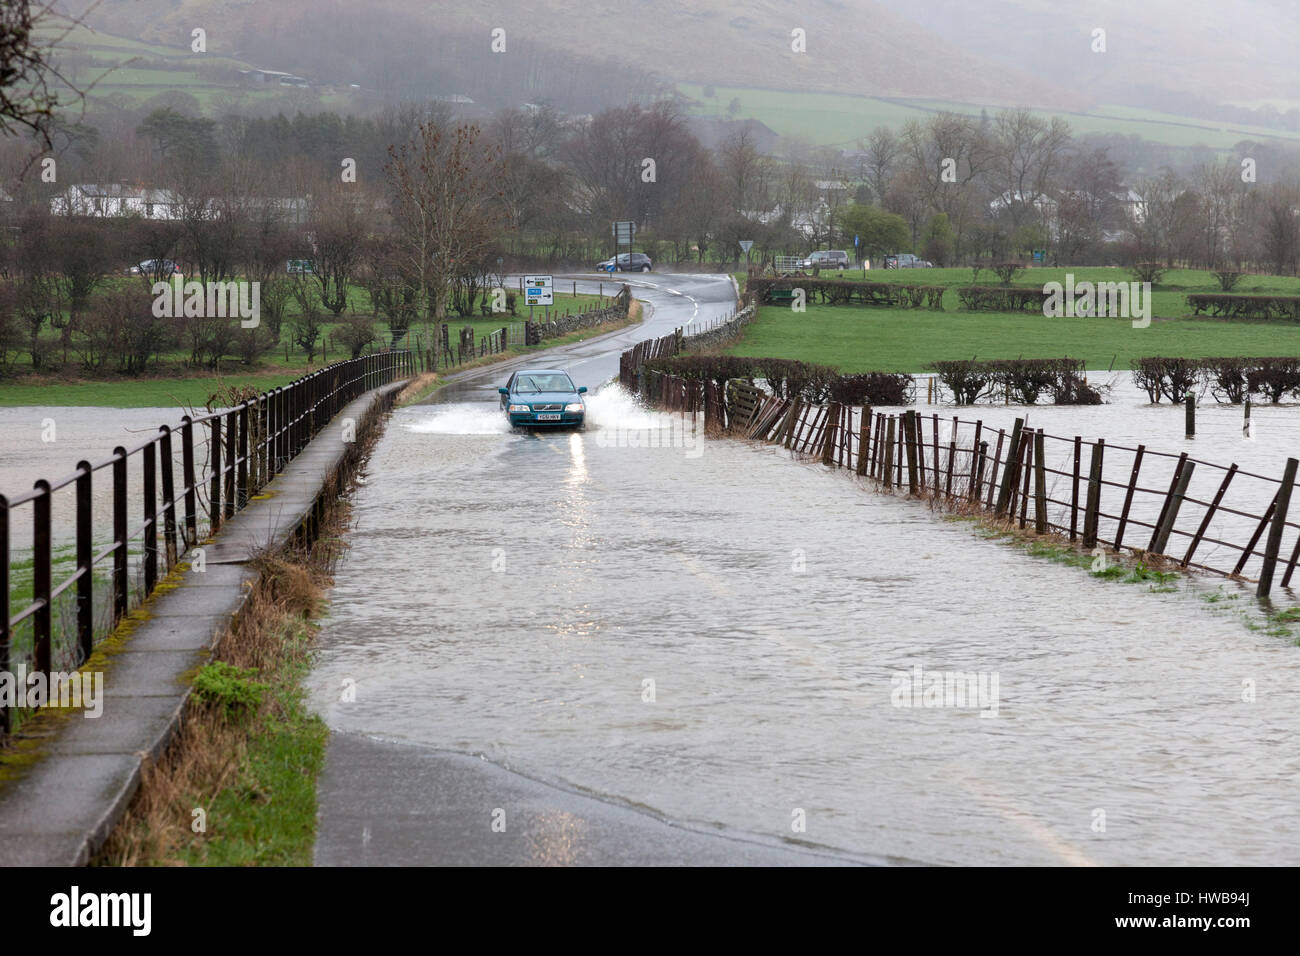 Thelkeld, Lake District, Cumbria UK.  Sunday 19th March 2017.  UK Weather.  Heavy rain has caused flooding in parts of Cumbria today.  This is the B5322 road close to the junction with the A66 near the village of Threlkeld © David Forster/Alamy Live News Stock Photo